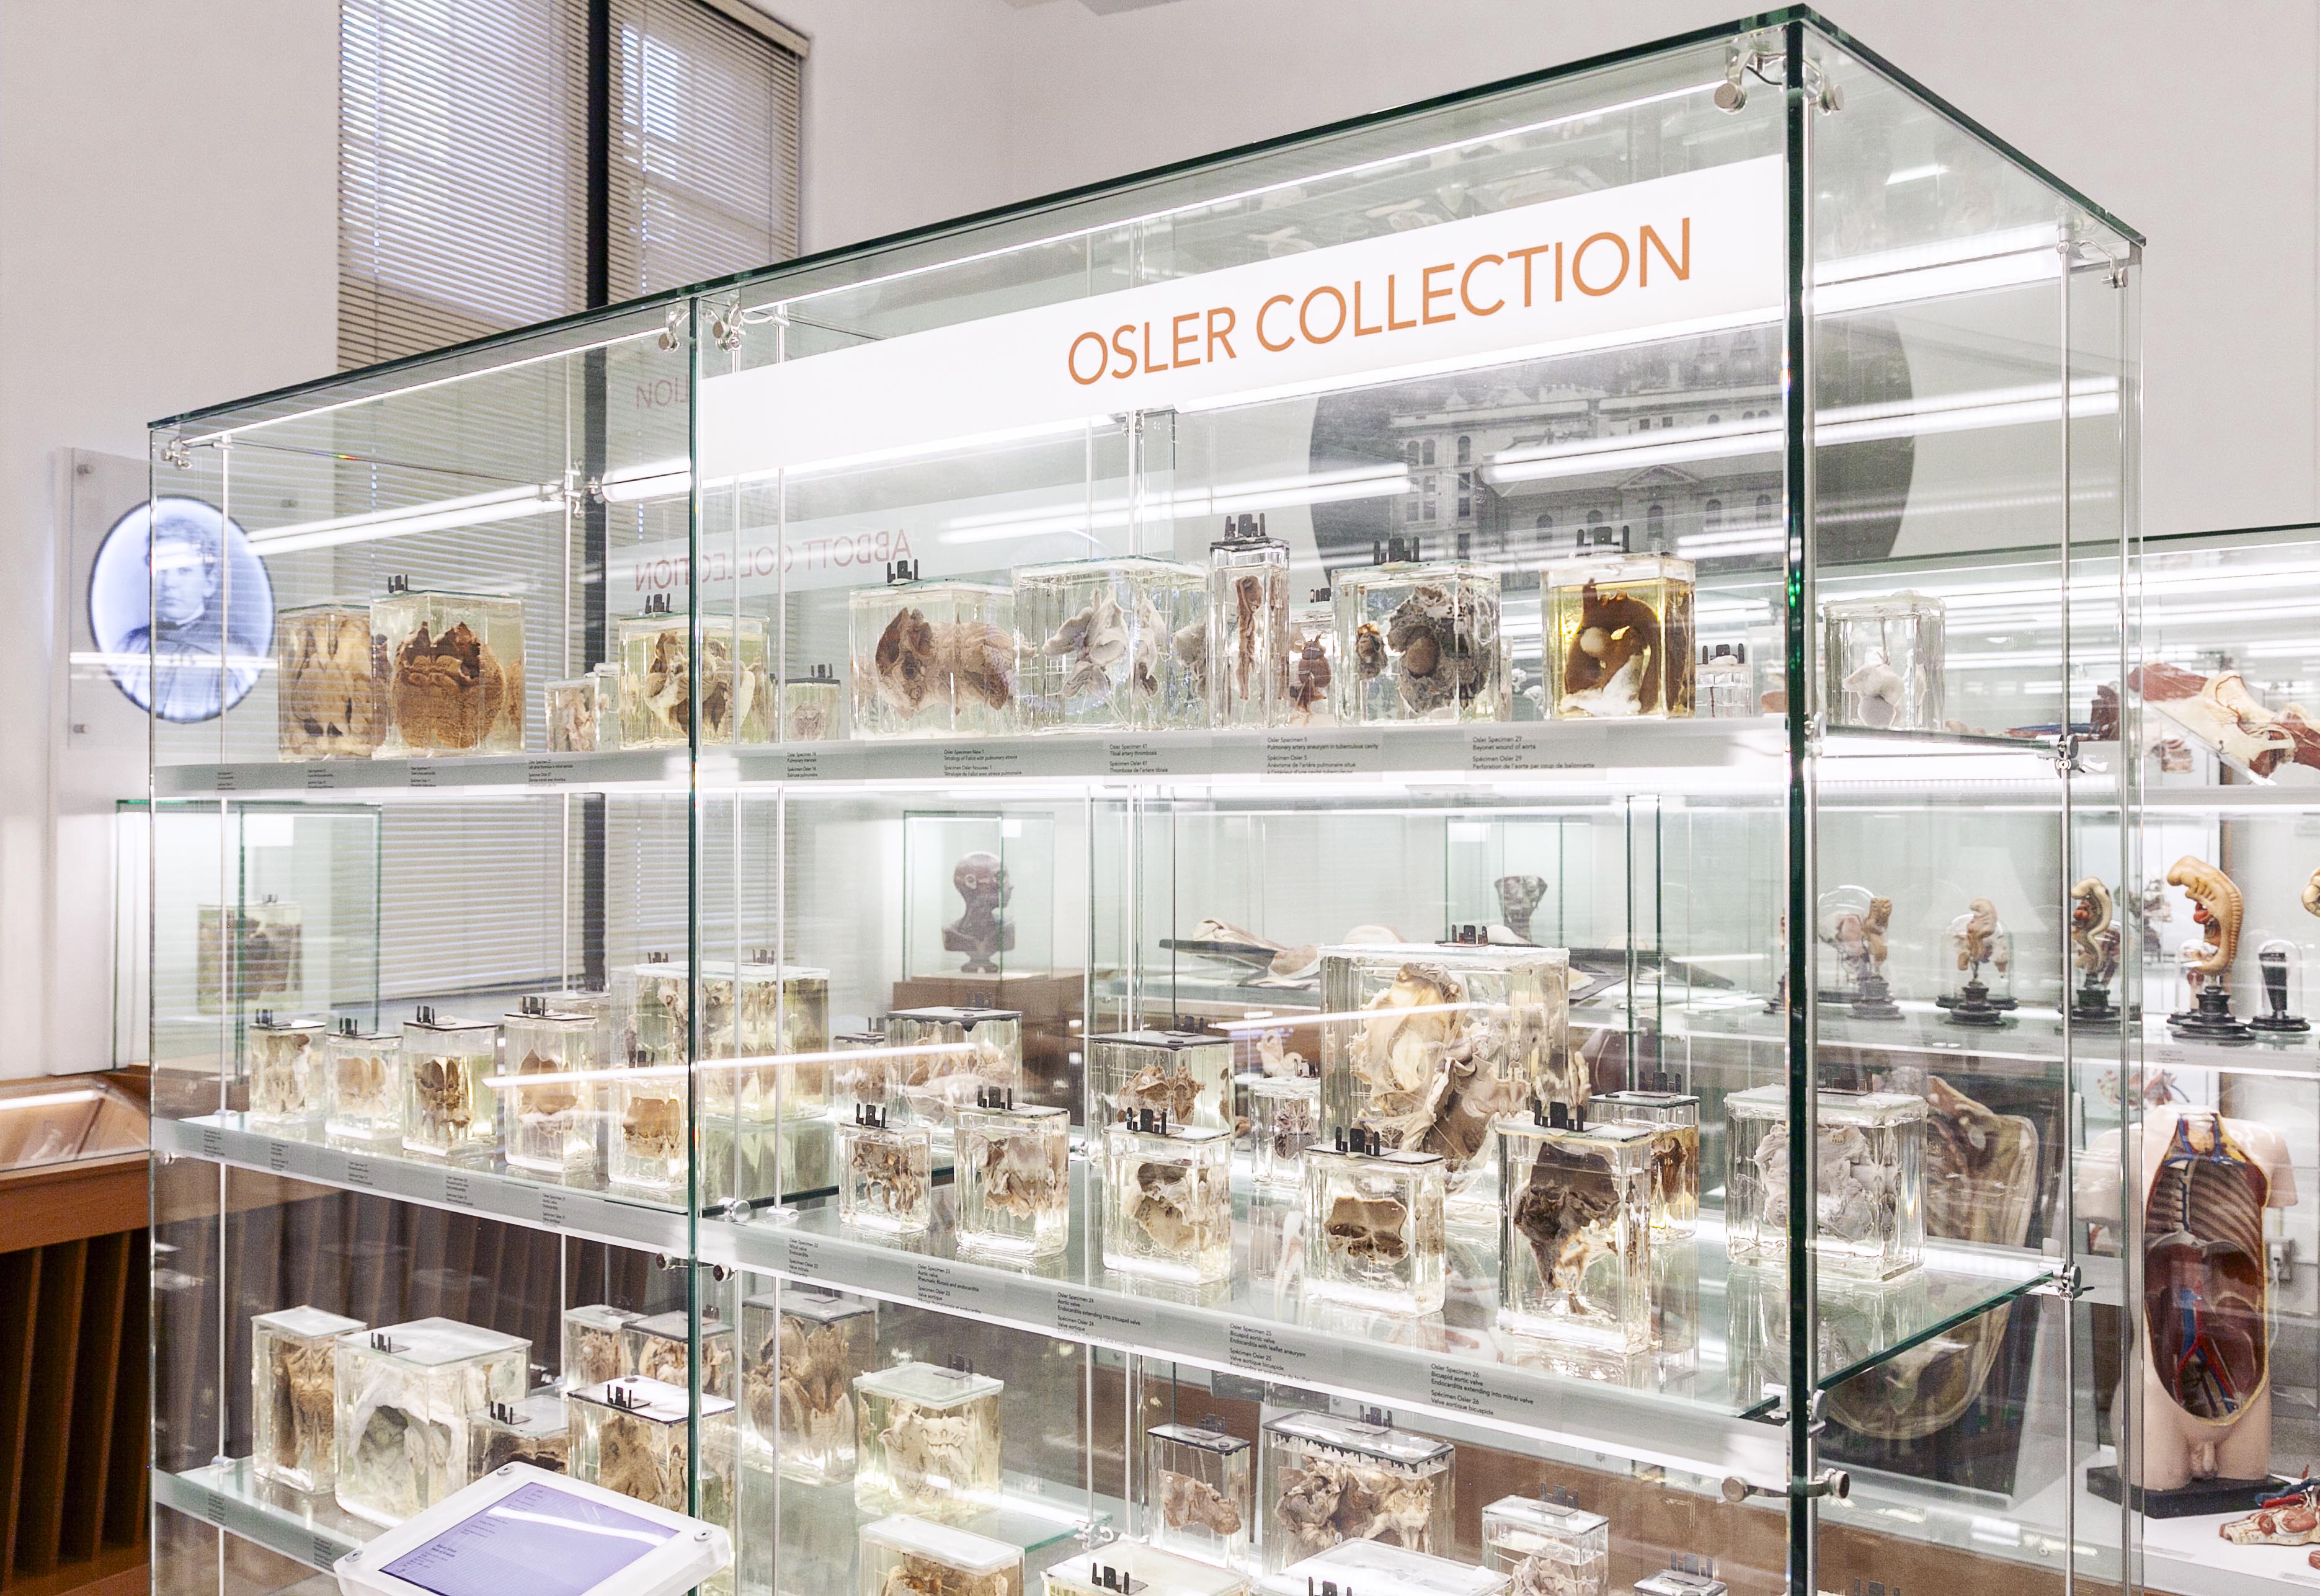 Osler collection in cabinet